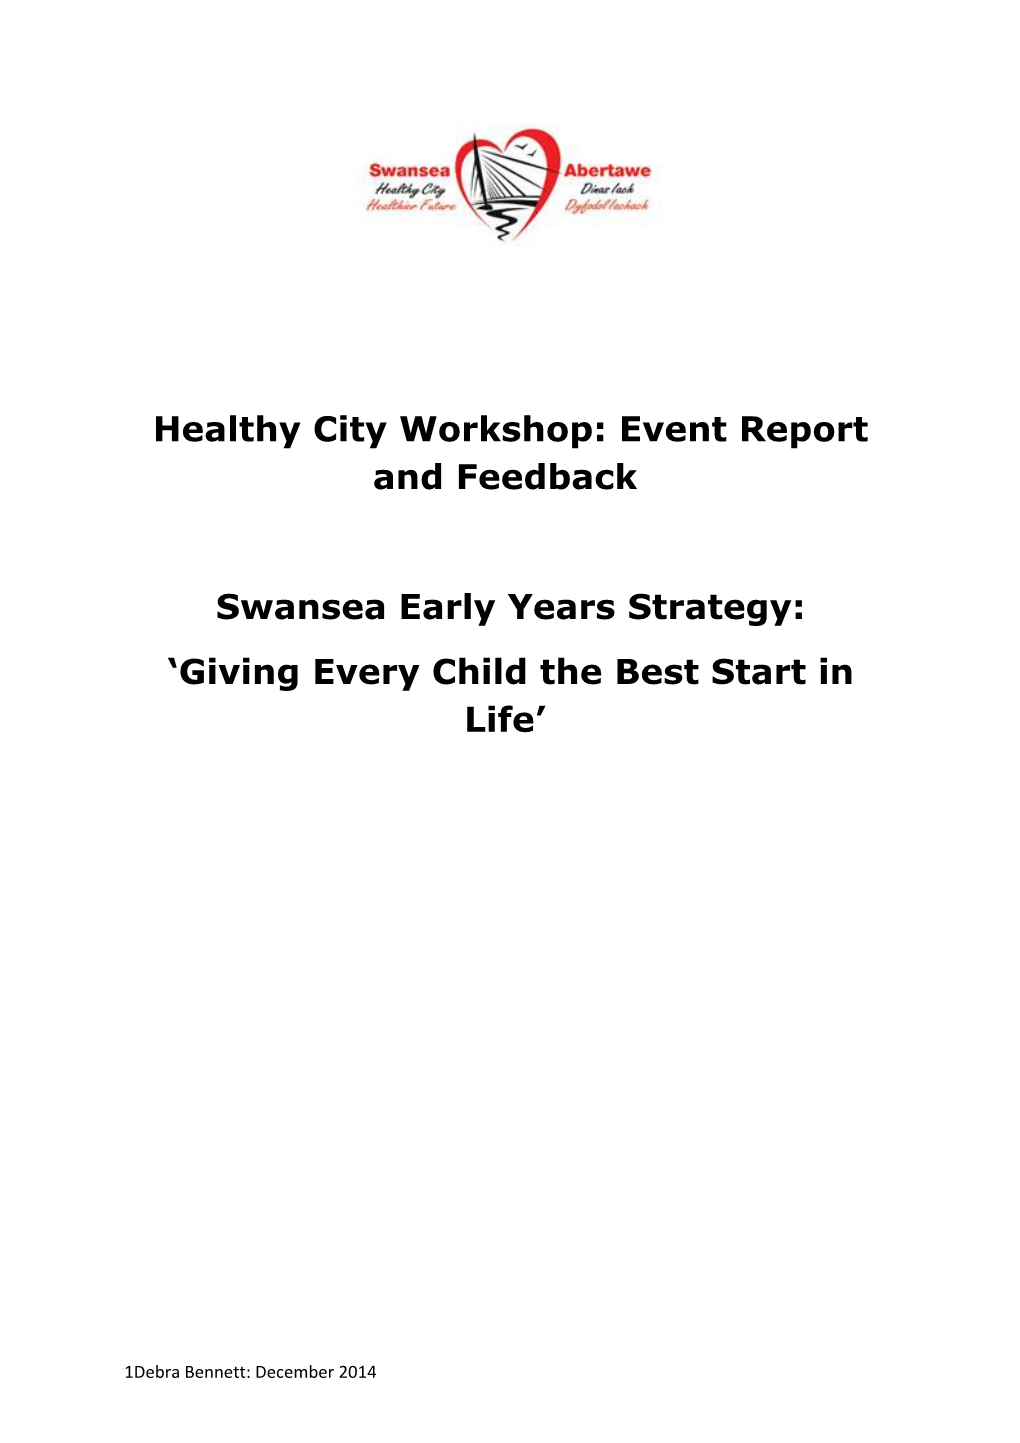 Healthy City Workshop: Event Report and Feedback